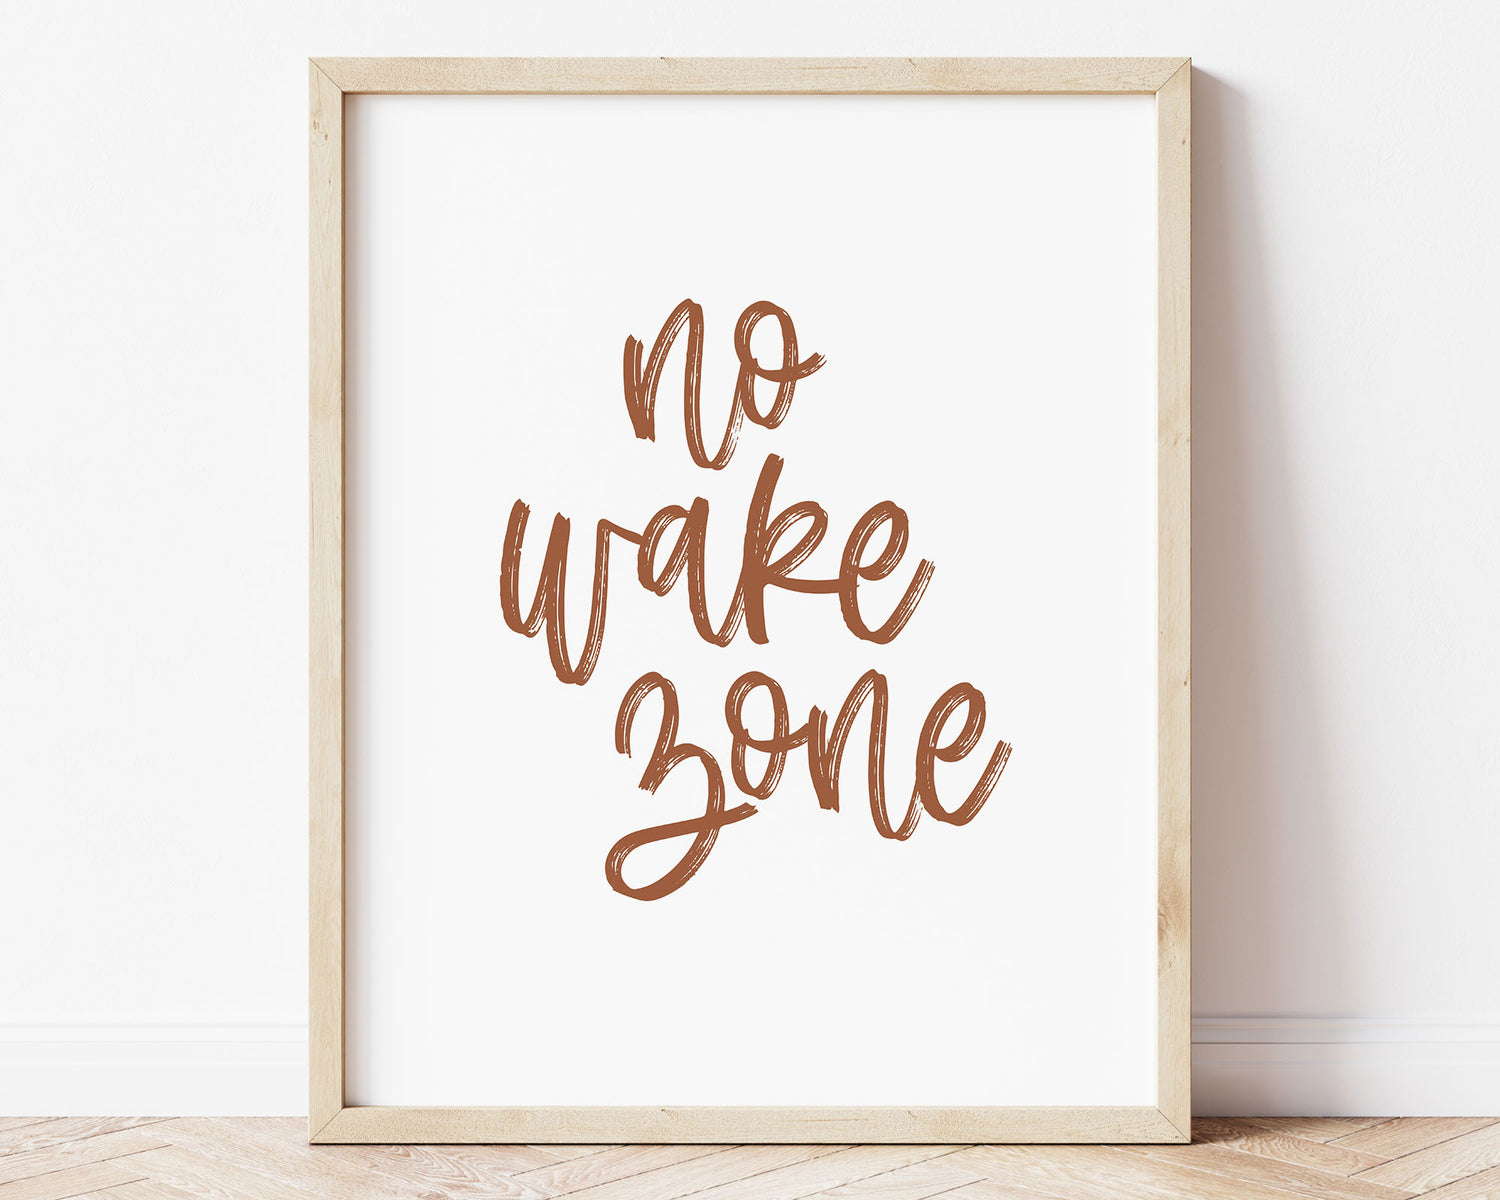 Rust Clay Terracotta earth tone colored No Wake Zone Printable Wall Art featuring a textured brush style cursive lettered quote perfect for Baby Boy Nautical Nursery Decor, Baby Girl Surf Nursery Wall Art, Nautical Kids Bedroom Decor or Children's Coastal Wall Art.